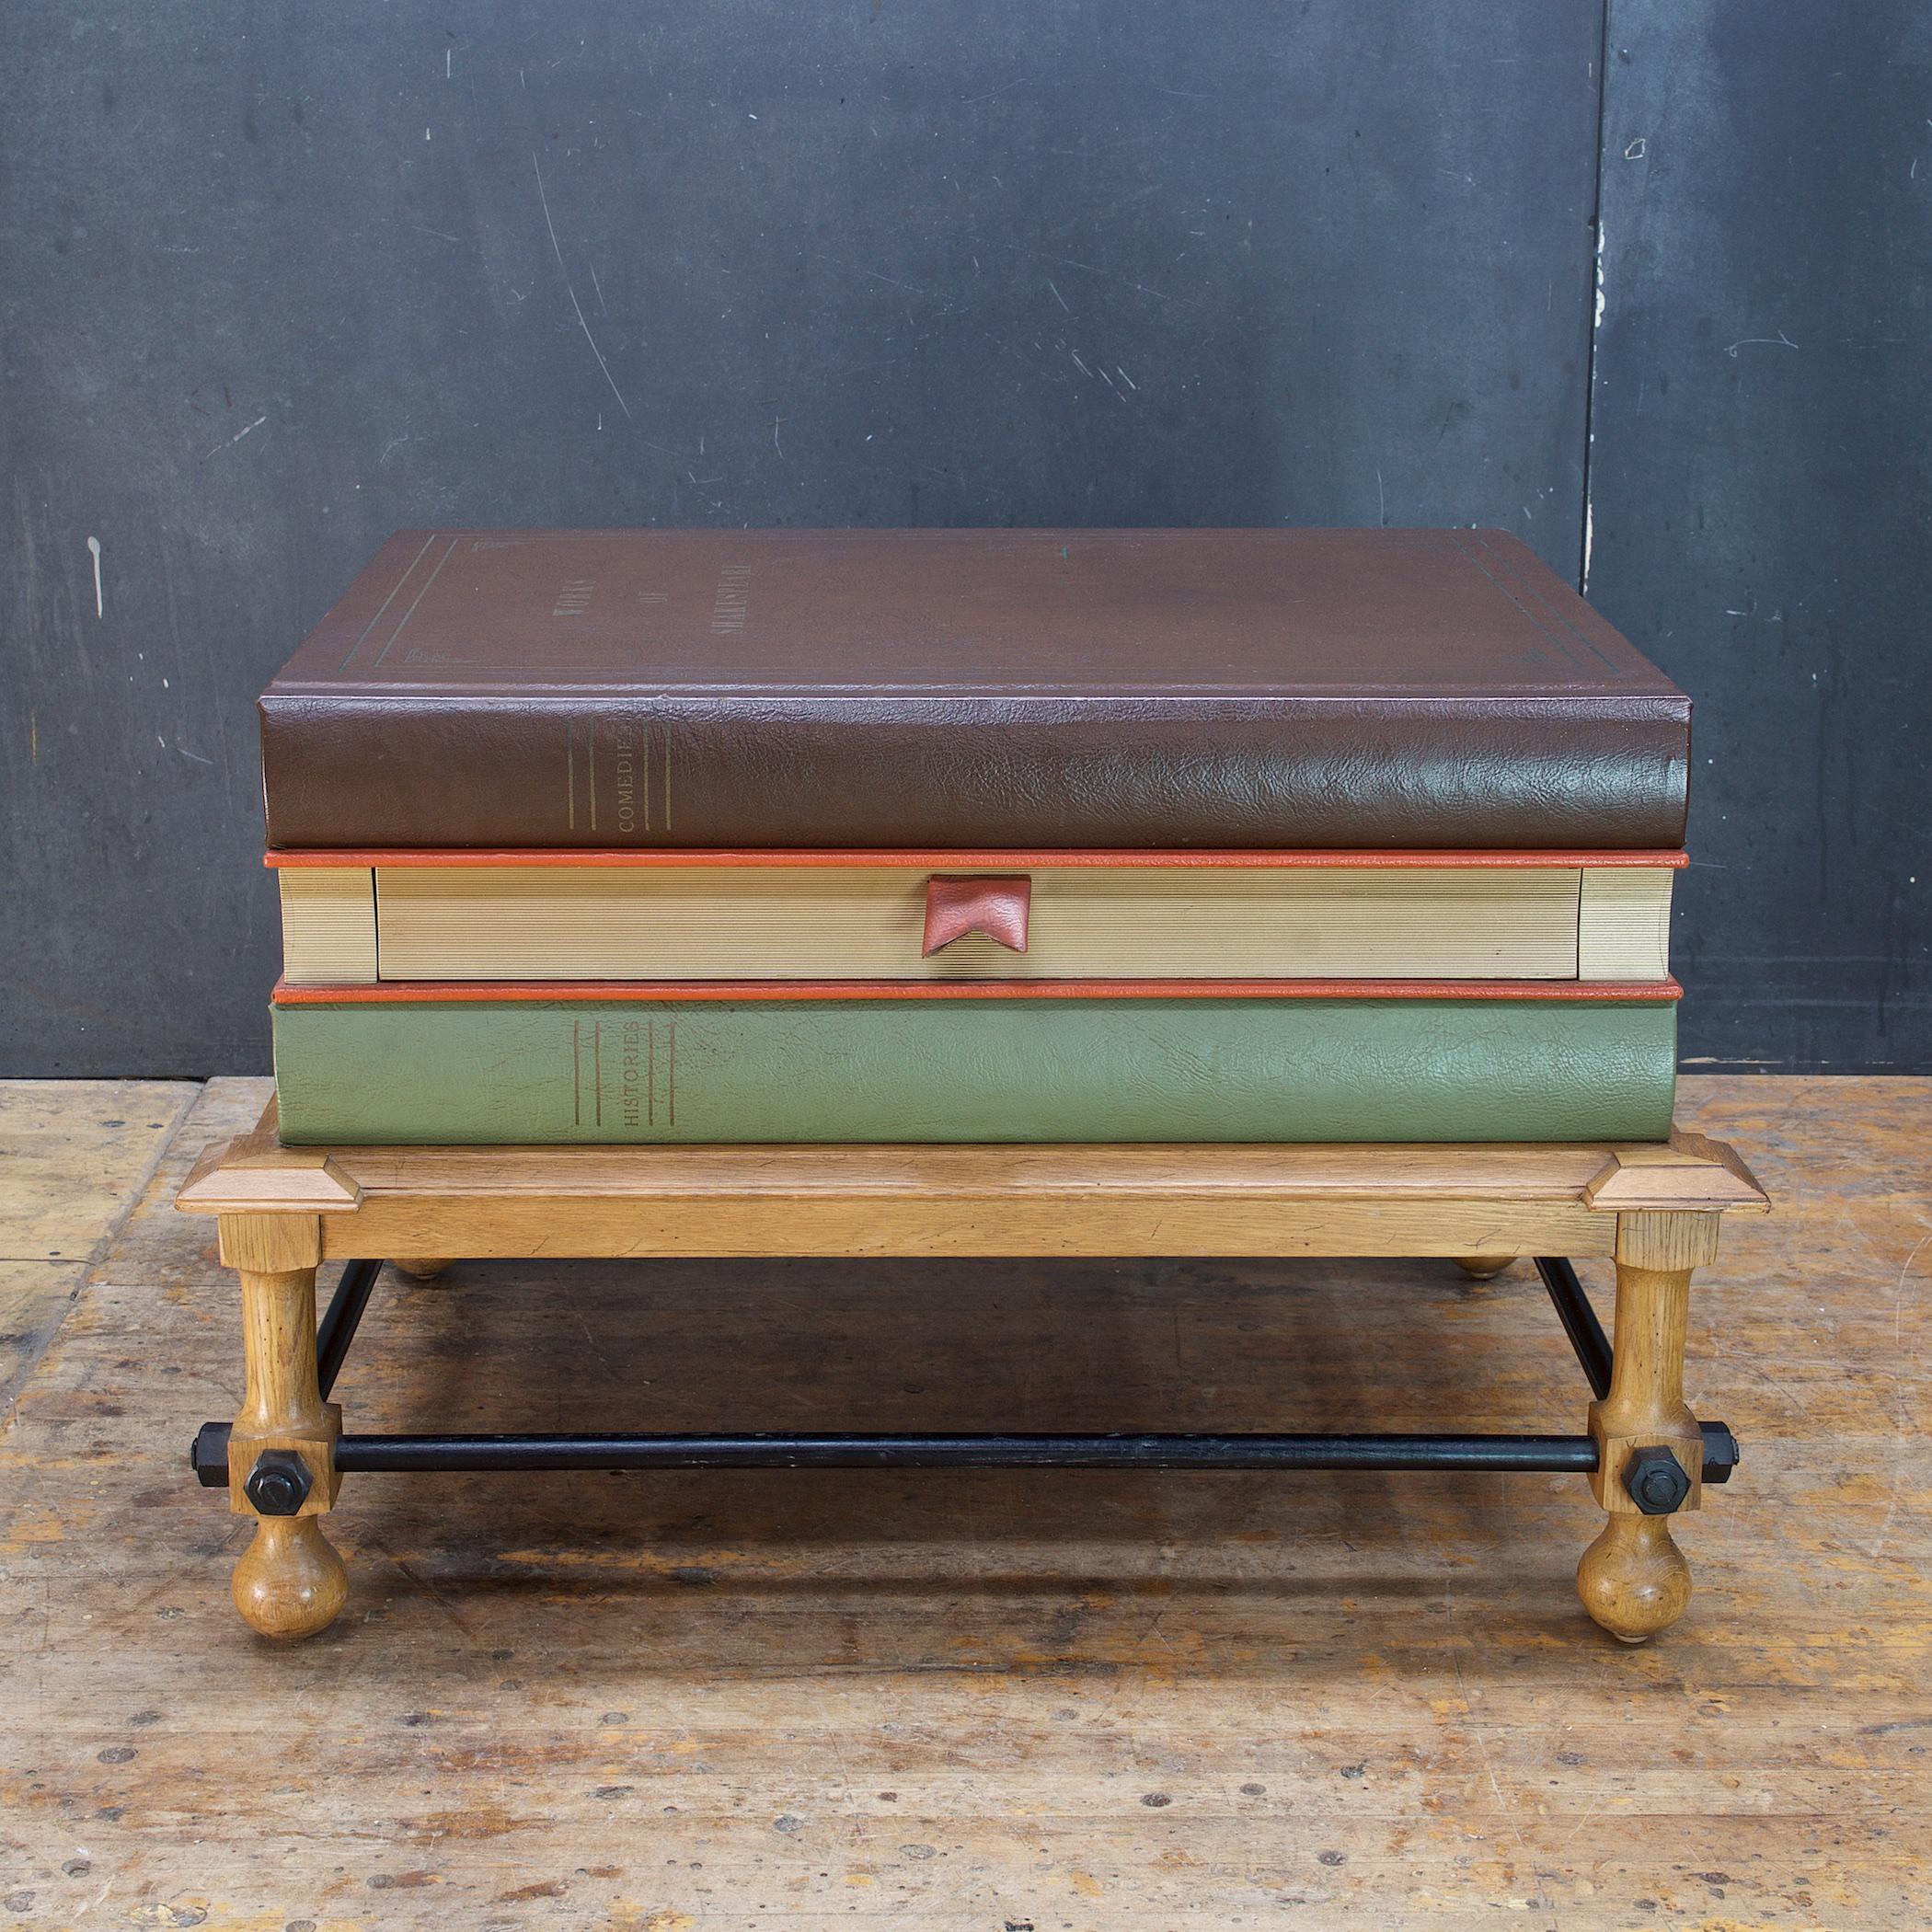 A rare John Dickinson designed Faux-Book Coffee Table for Drexel, part of the short lived Et Cetera series. Three large stacked Shakespeare books make up the tabletop, with the middle book having a pull-out single drawer, the pull resembling a